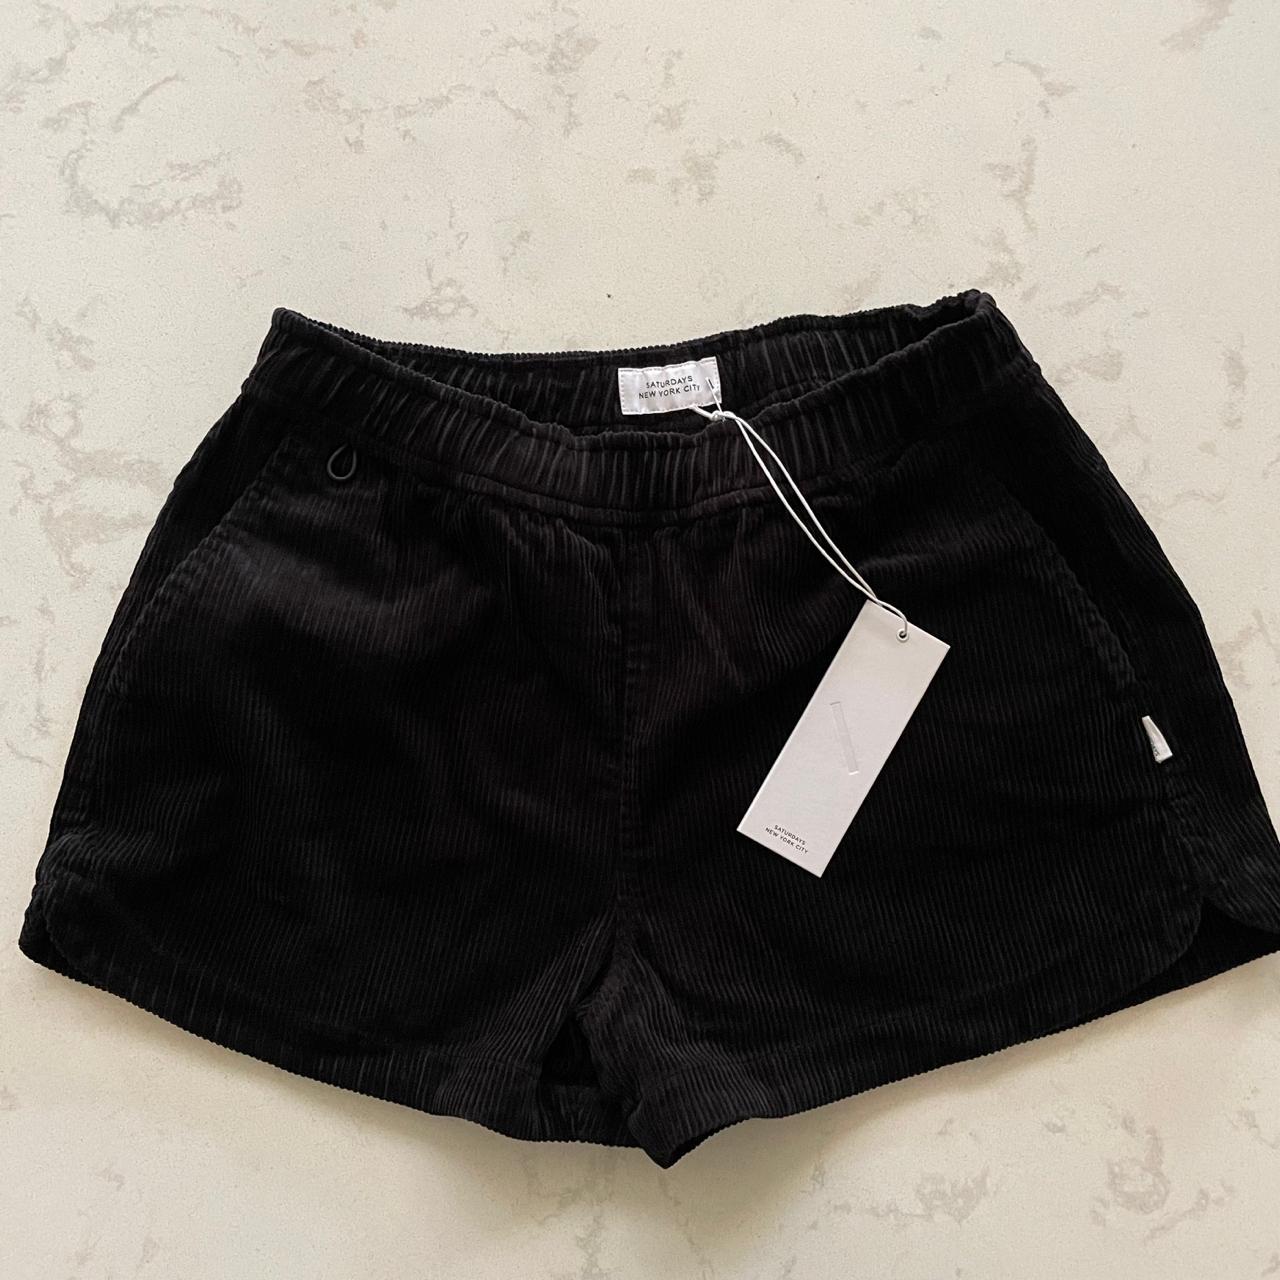 Product Image 1 - ♠️ NWT Pia Cord Short